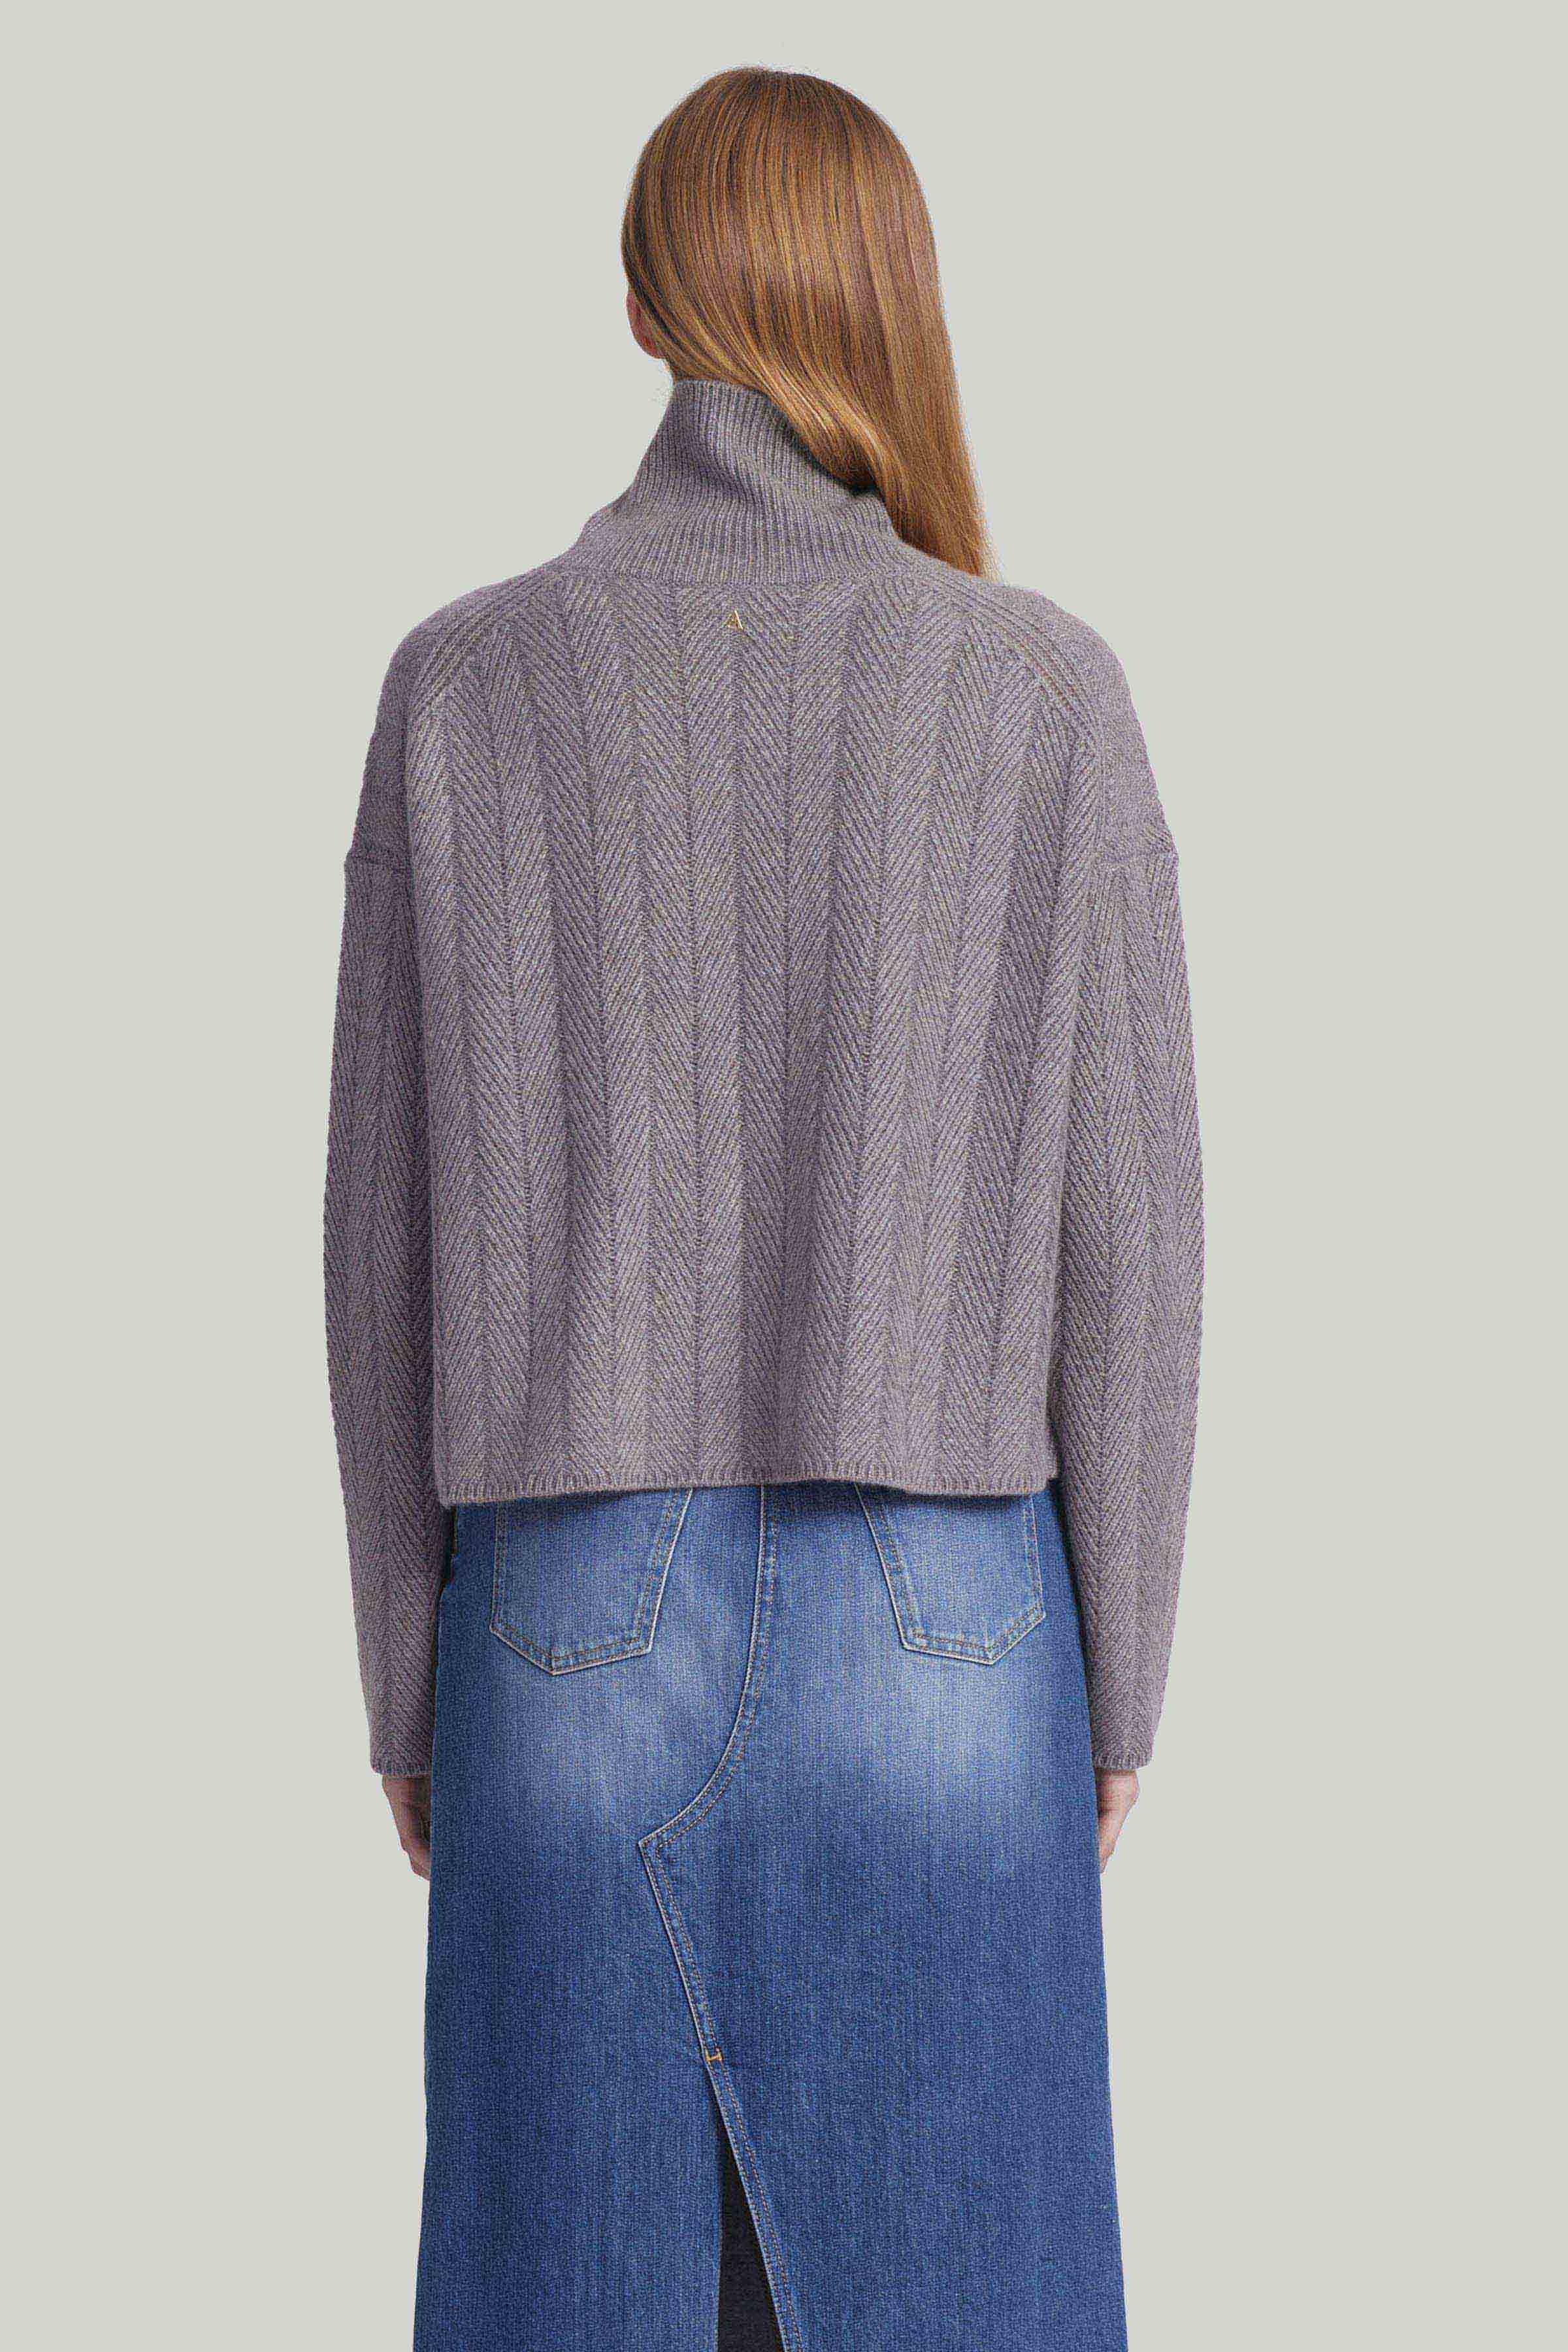 'TERENCE' SWEATER - 4